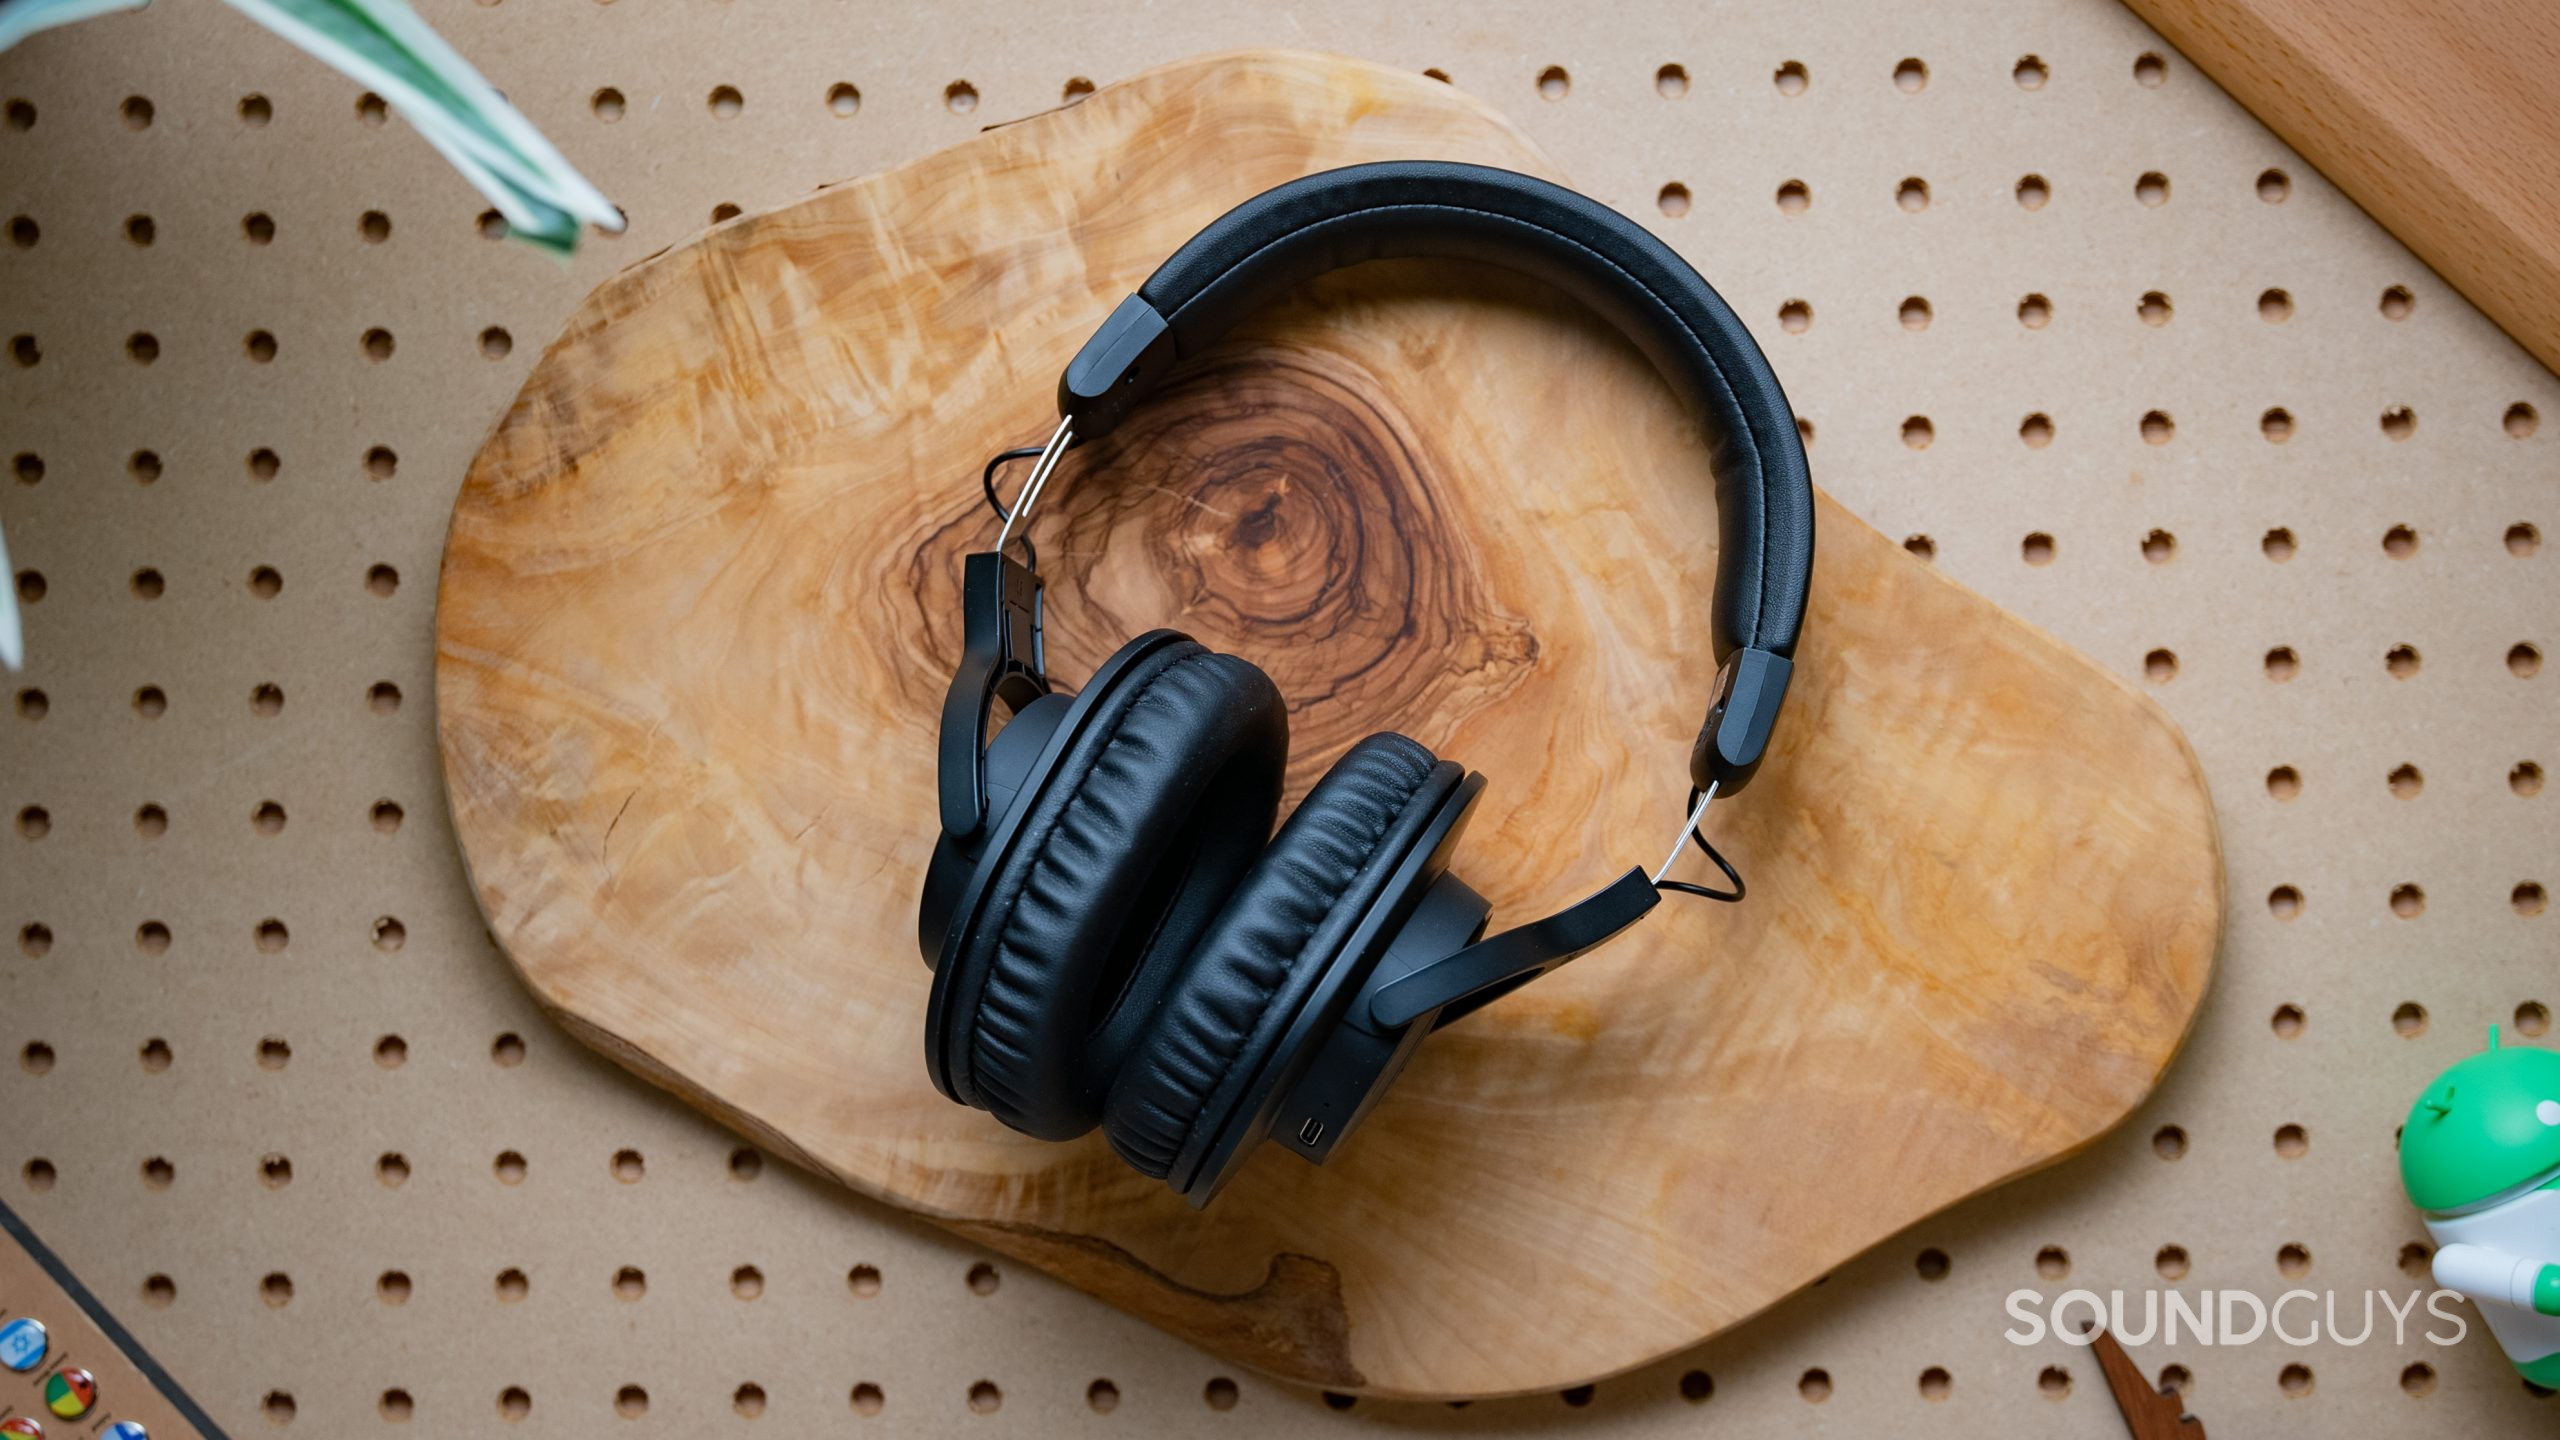 The Audio-Technica ATH-M20xBT headphones shot from above resting on a wood surface.